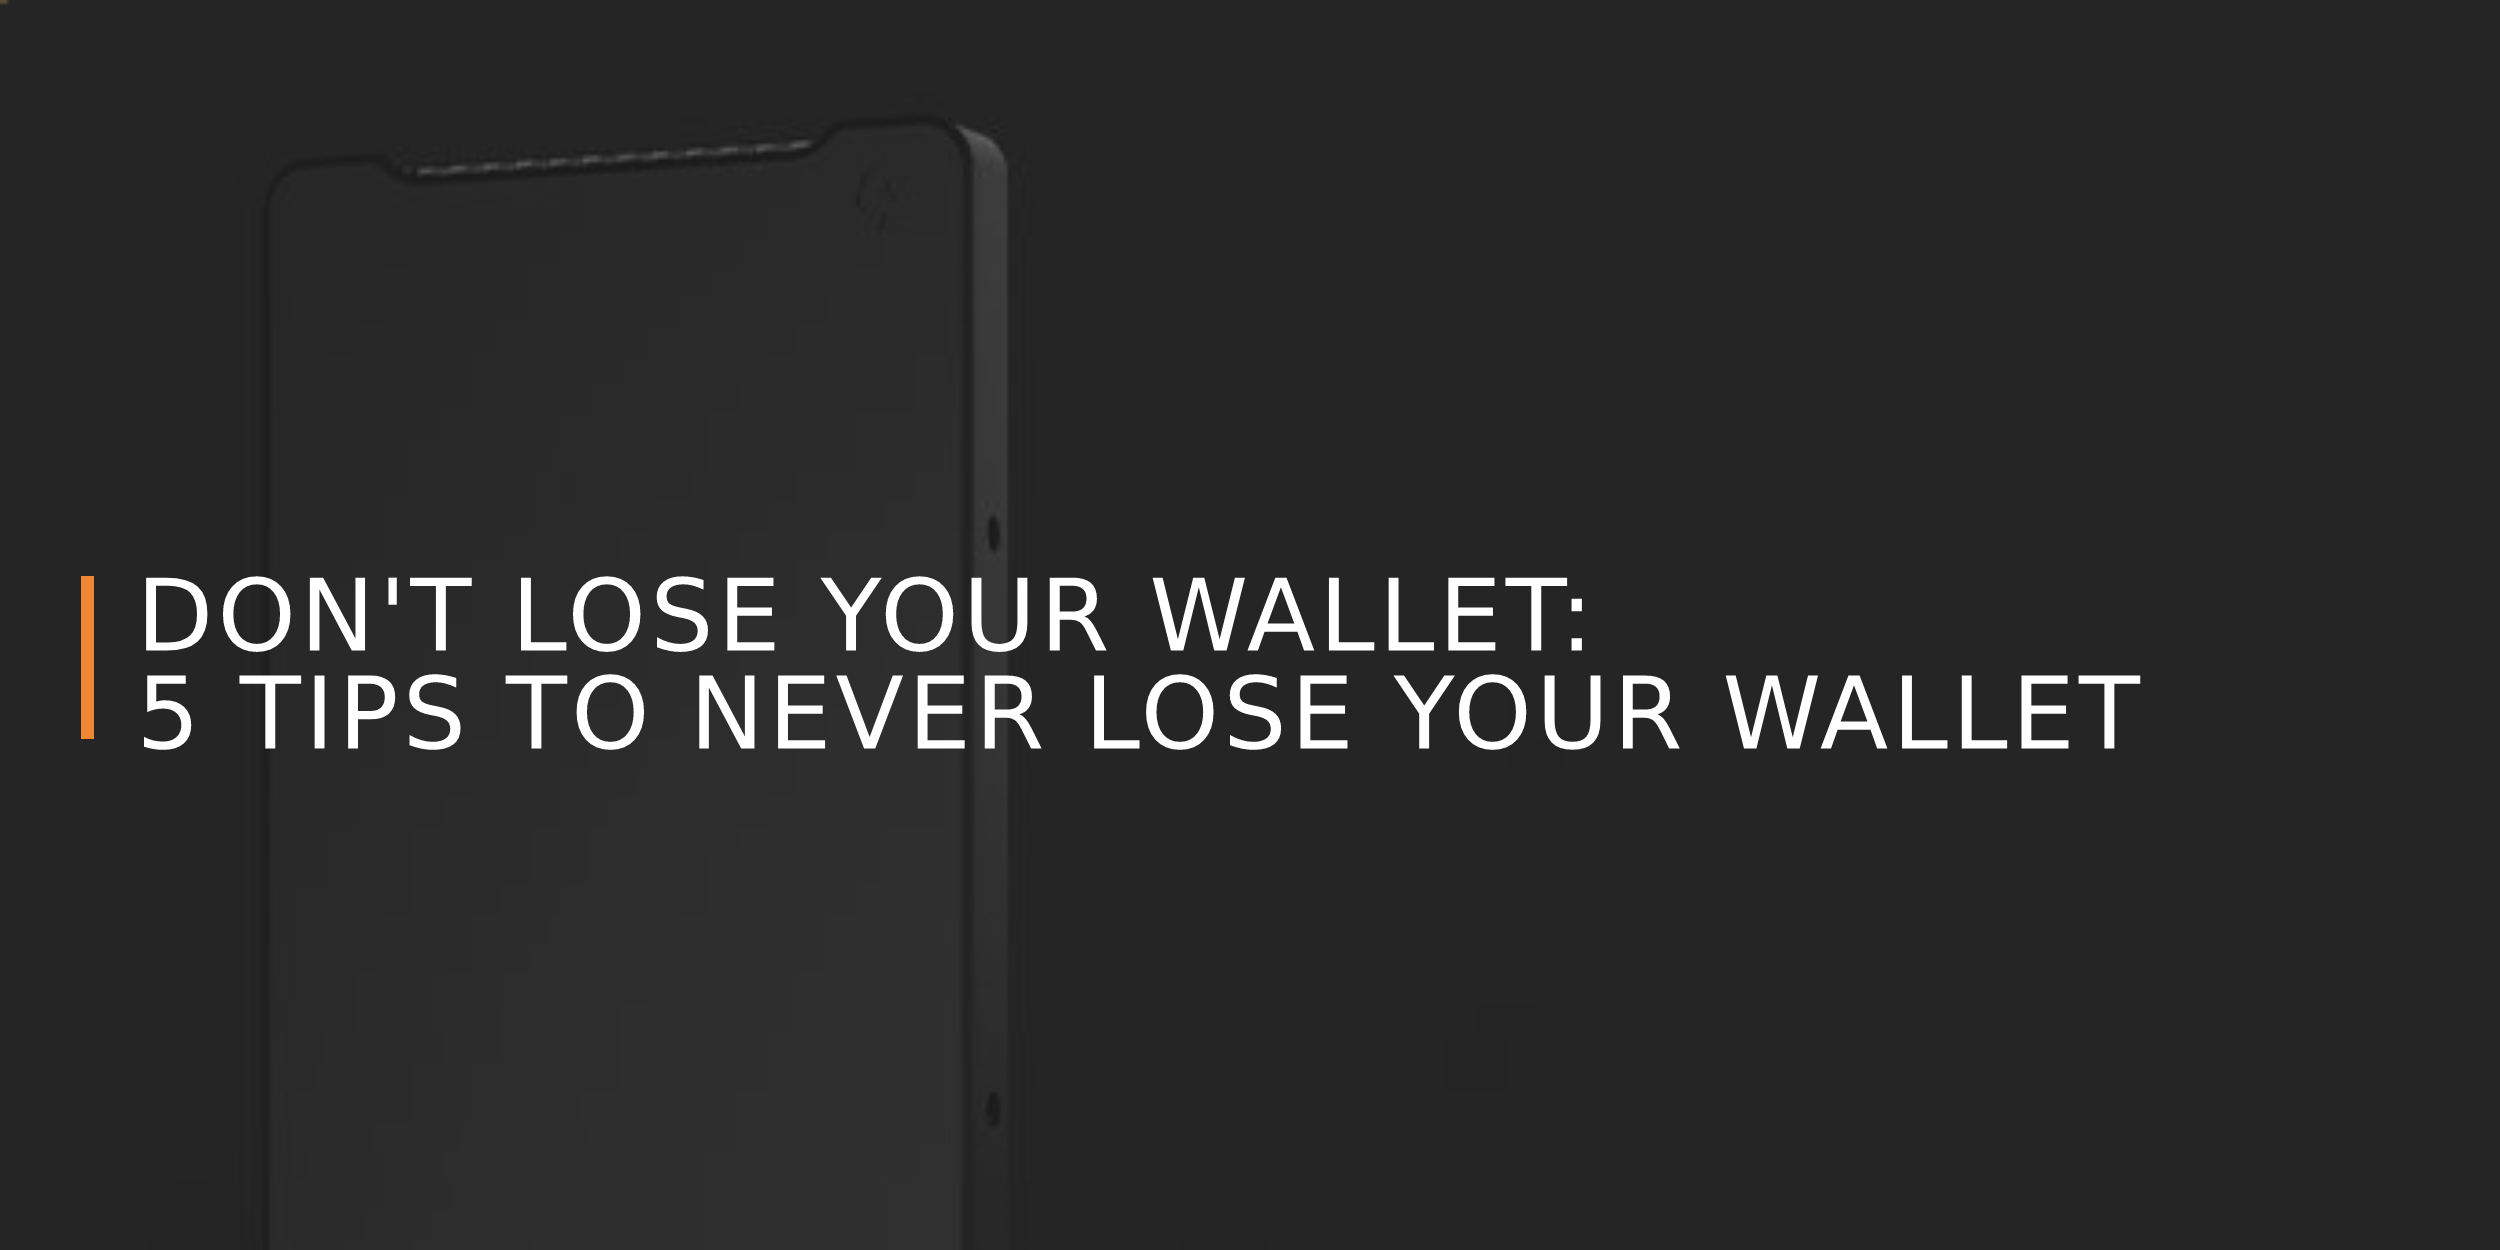 5 Tips to Not Lose Your Wallet